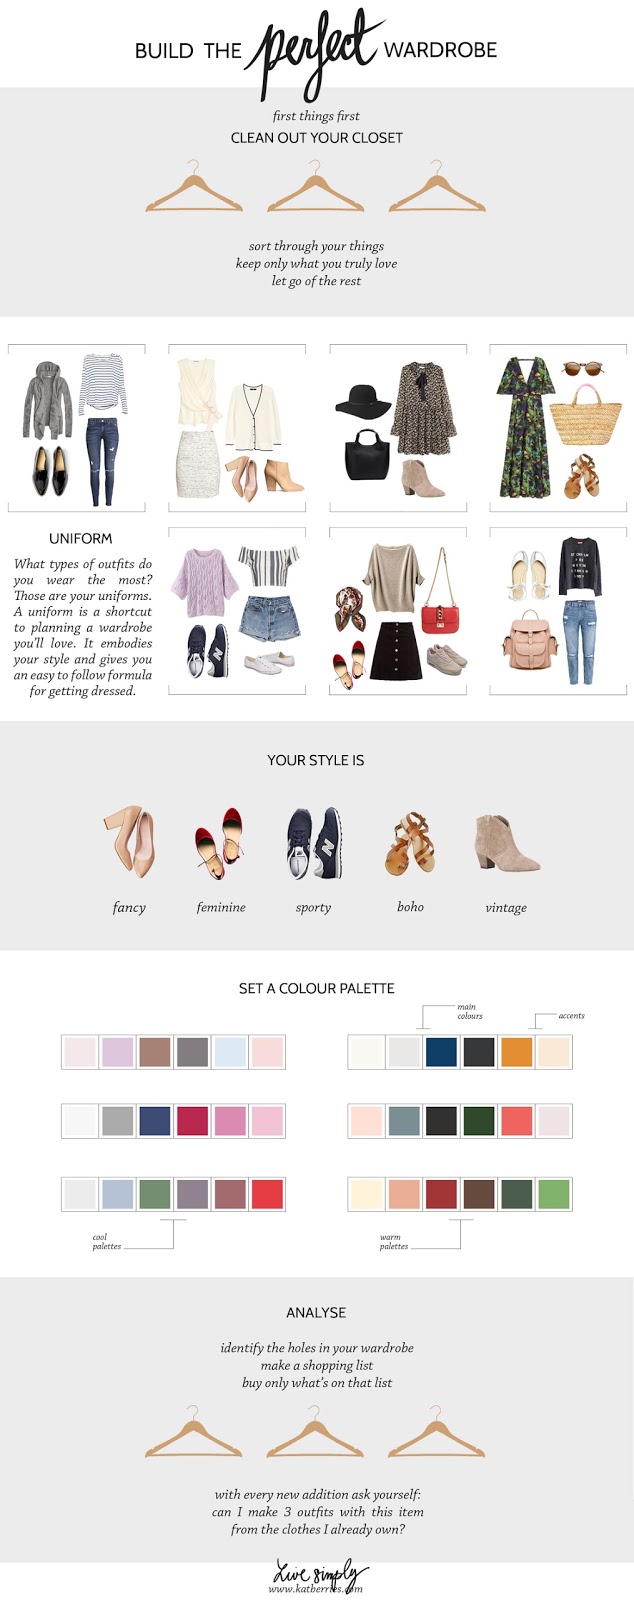 KATBERRIES: HOW TO BUILD THE PERFECT (CAPSULE) WARDROBE